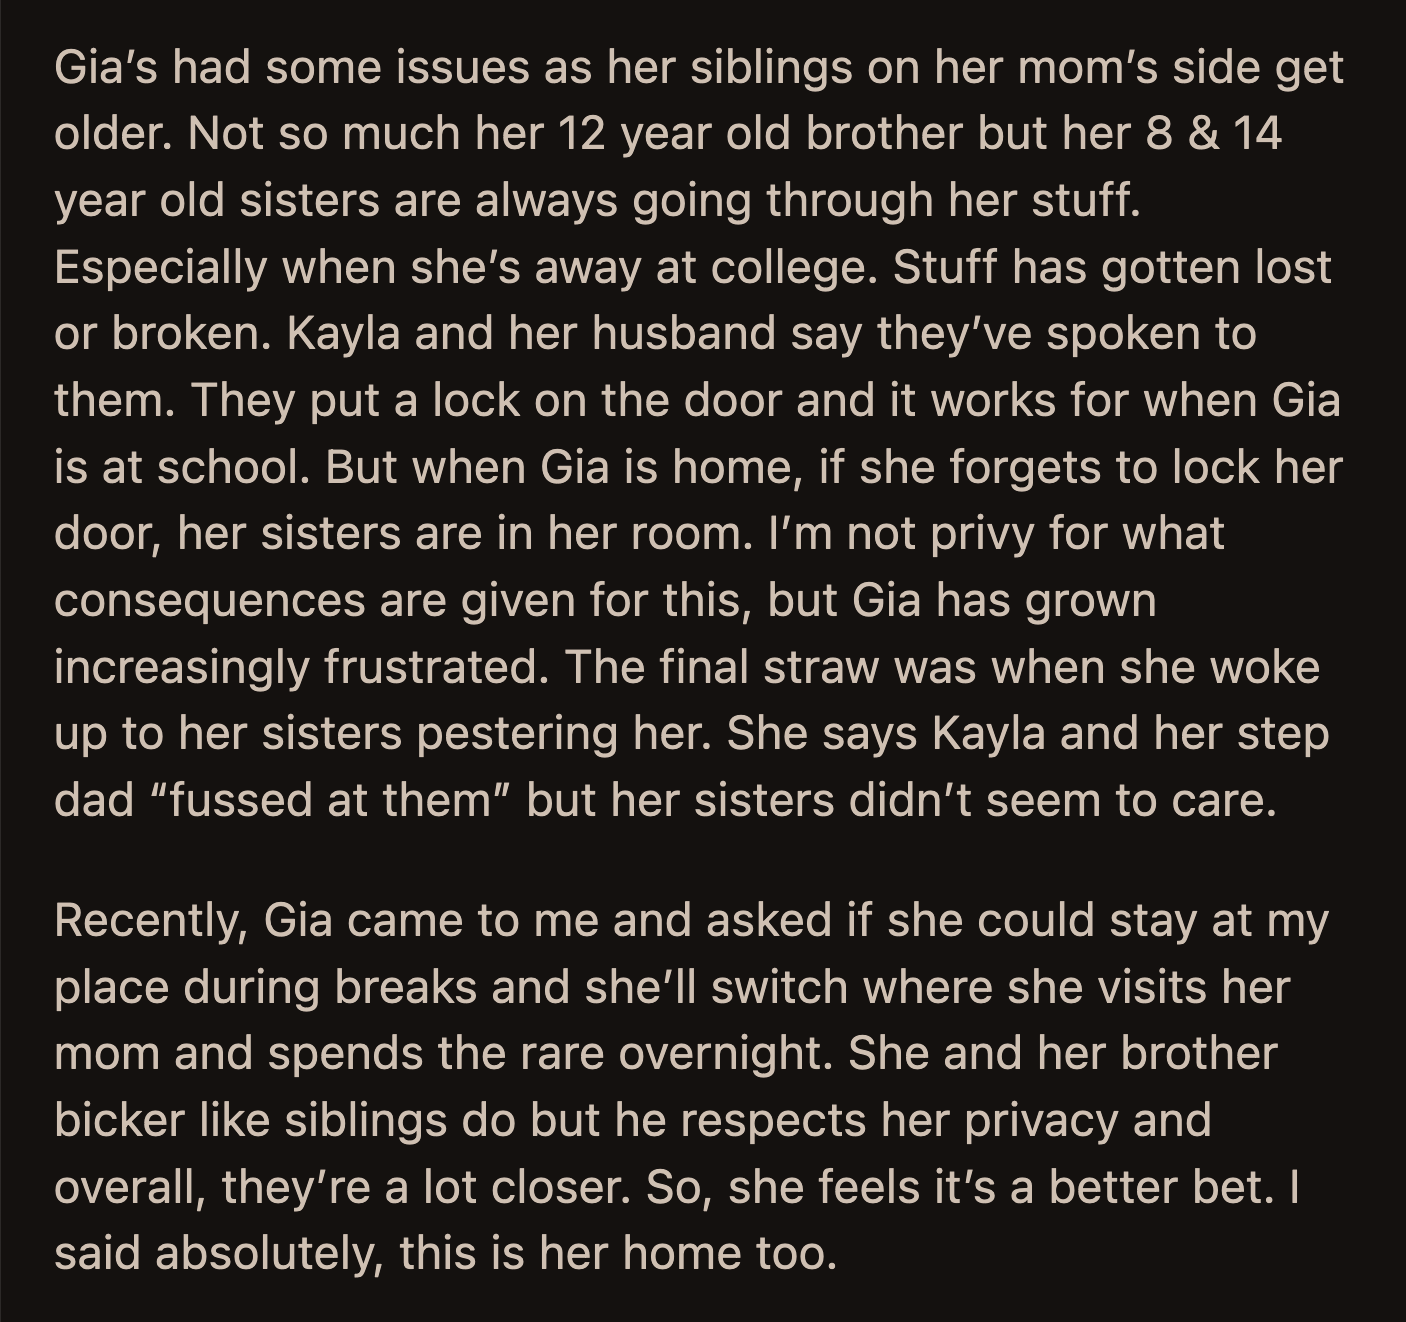 OP was happy to report that Gia and her brother got along despite their bickering. He respects his sister's privacy, so Gia isn't worried about her stuff.